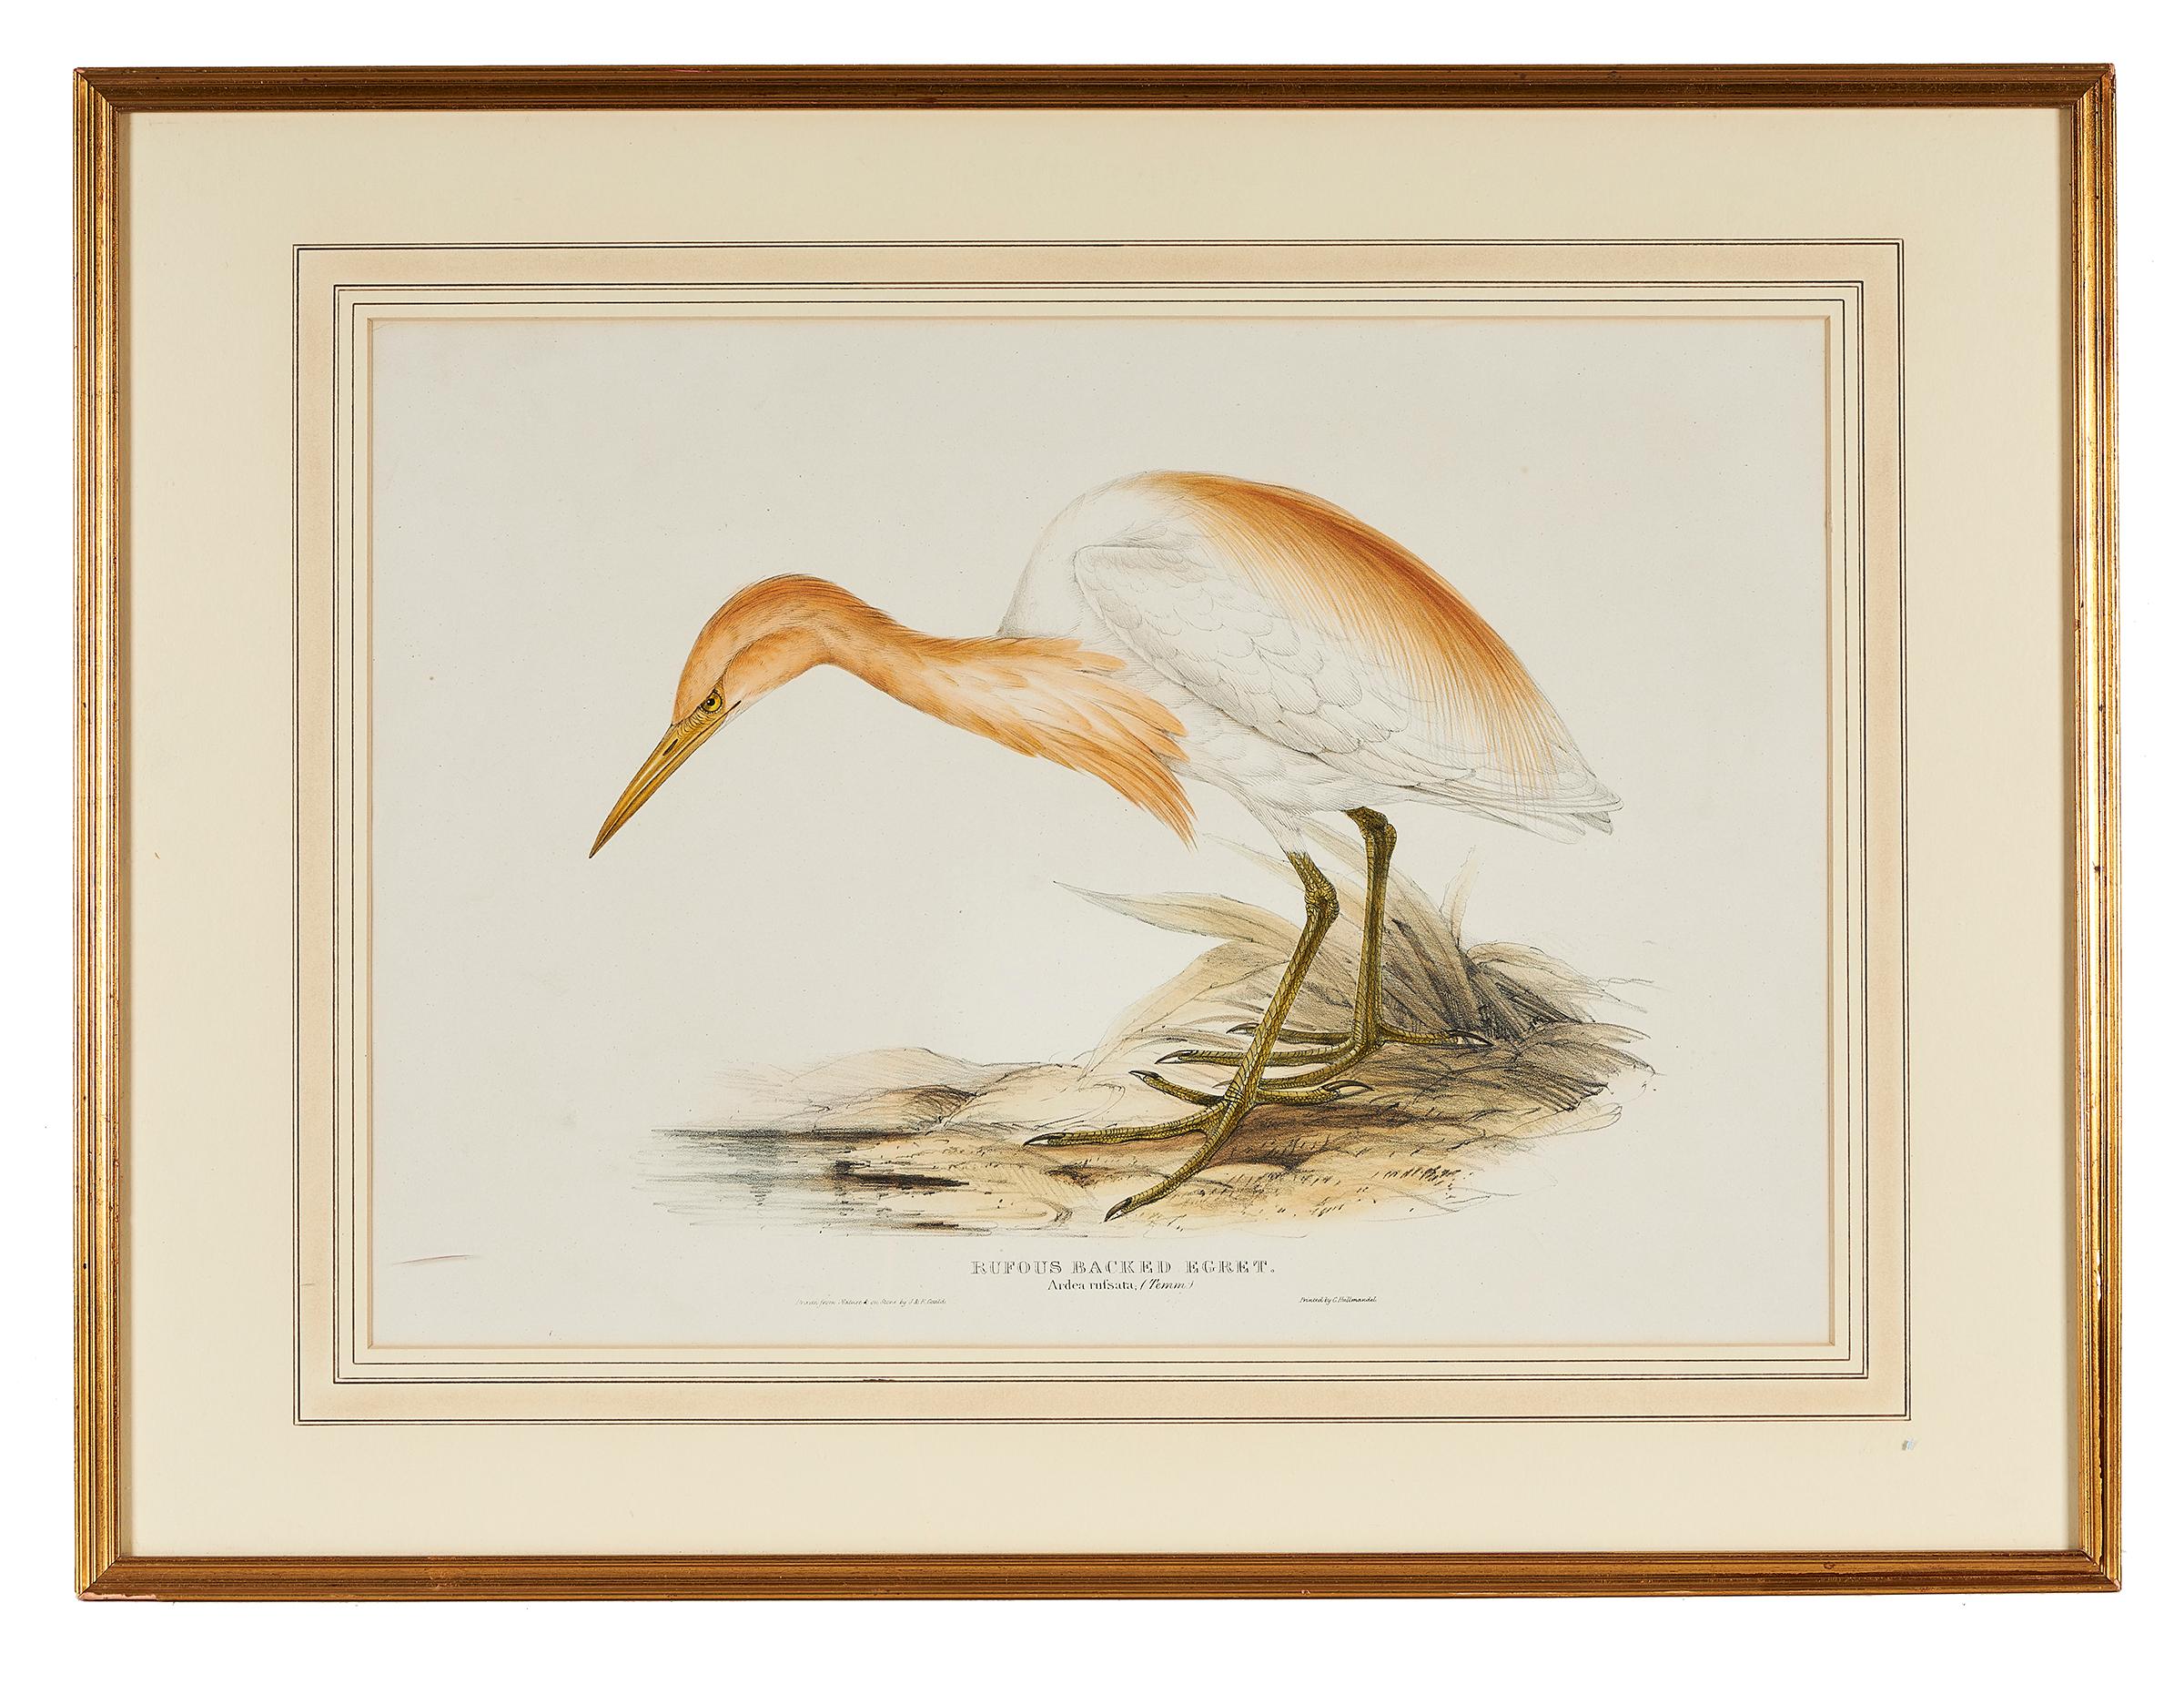 John Gould (English, 1804-1881), 'Rufous Backed Egret, Ardea Rufsata', Cattle Erget, 1832-1837, hand colored lithograph from 'The Birds of Europe', framed.